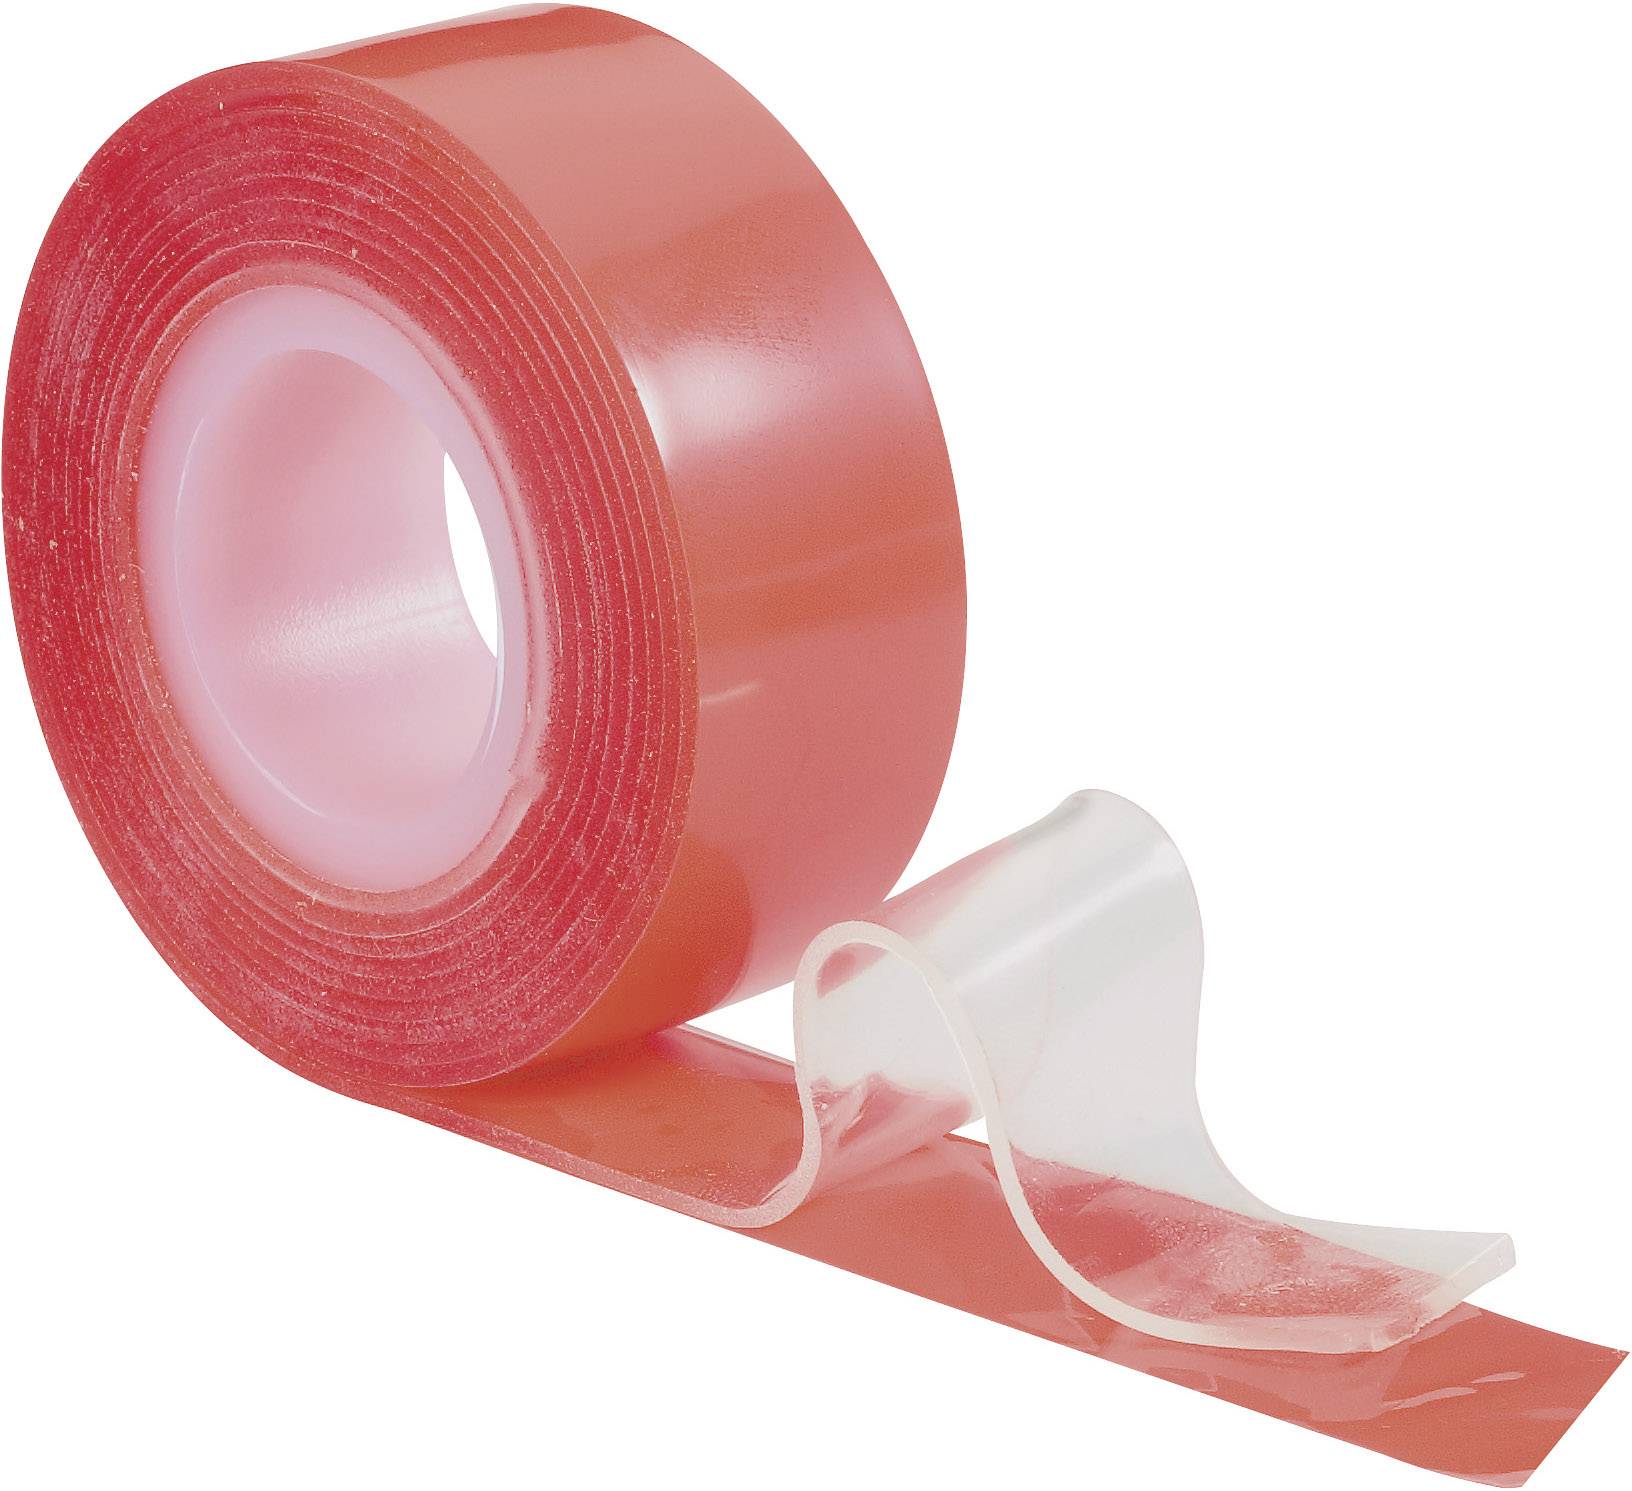 extra strong double sided adhesive tape